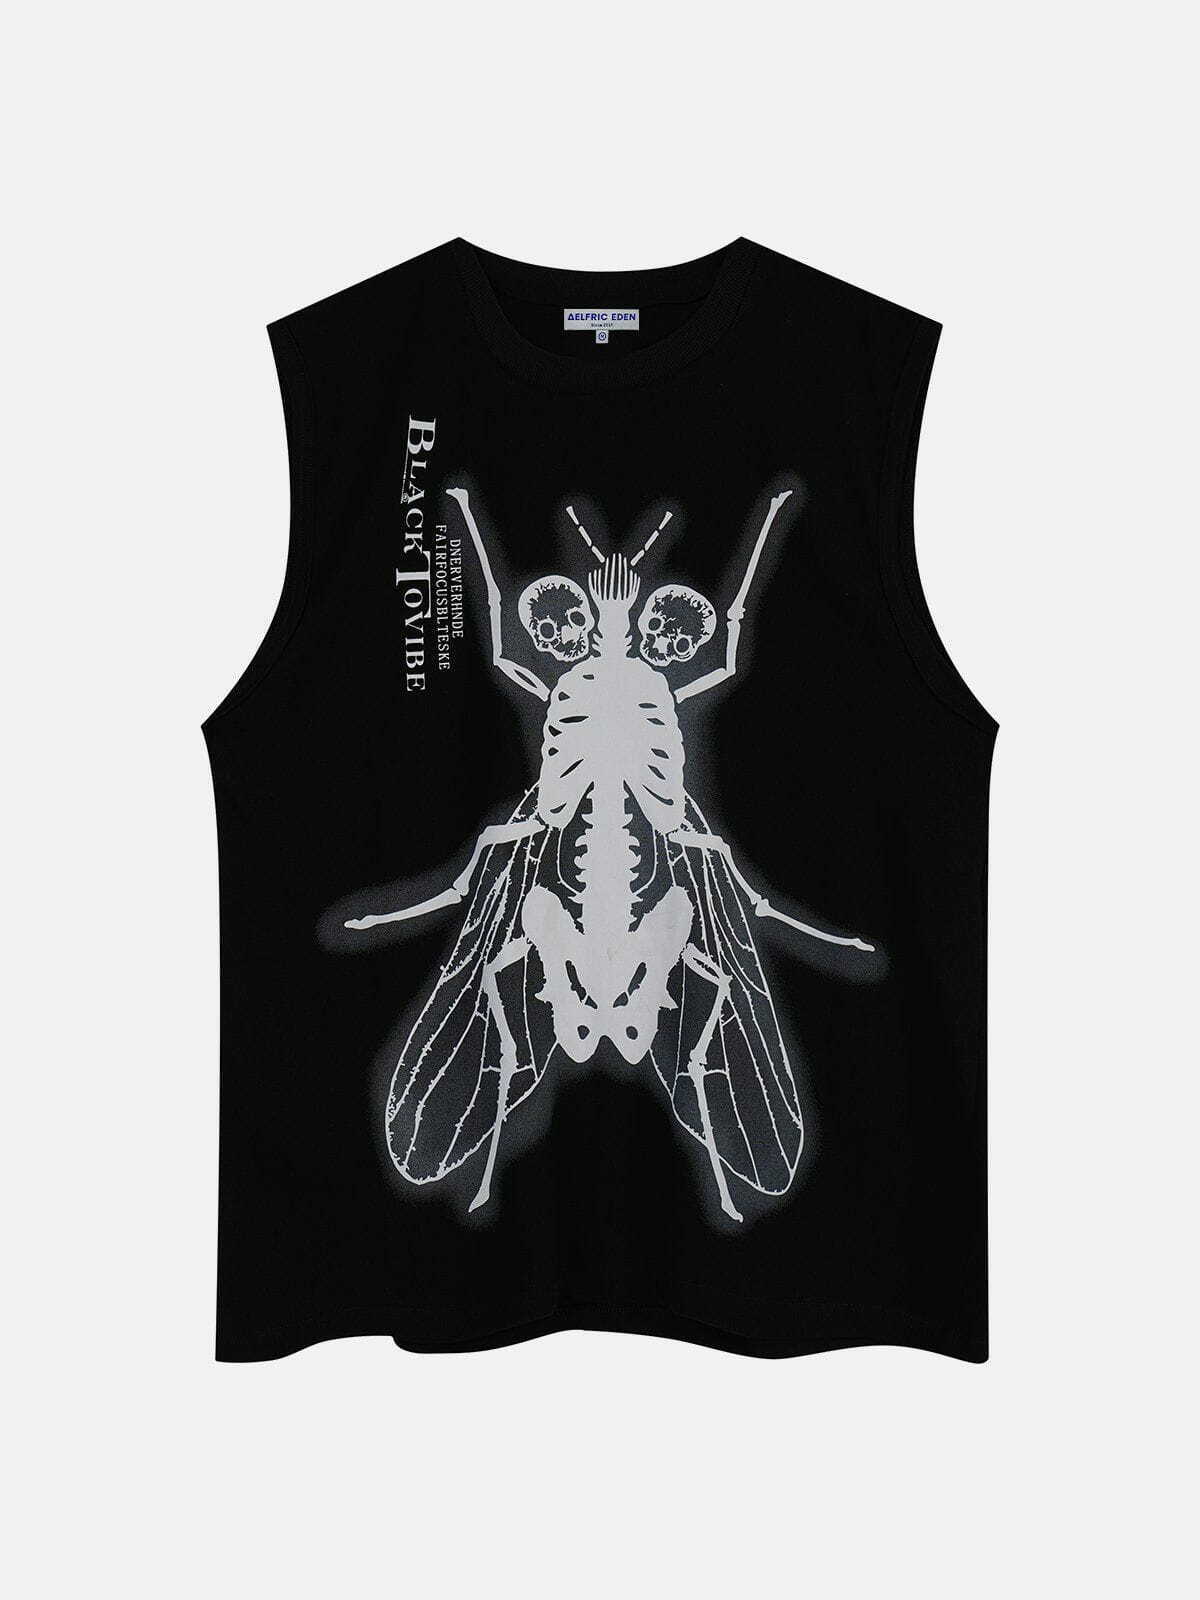 edgy insect skeleton vest   youthful & urban streetwear 5952